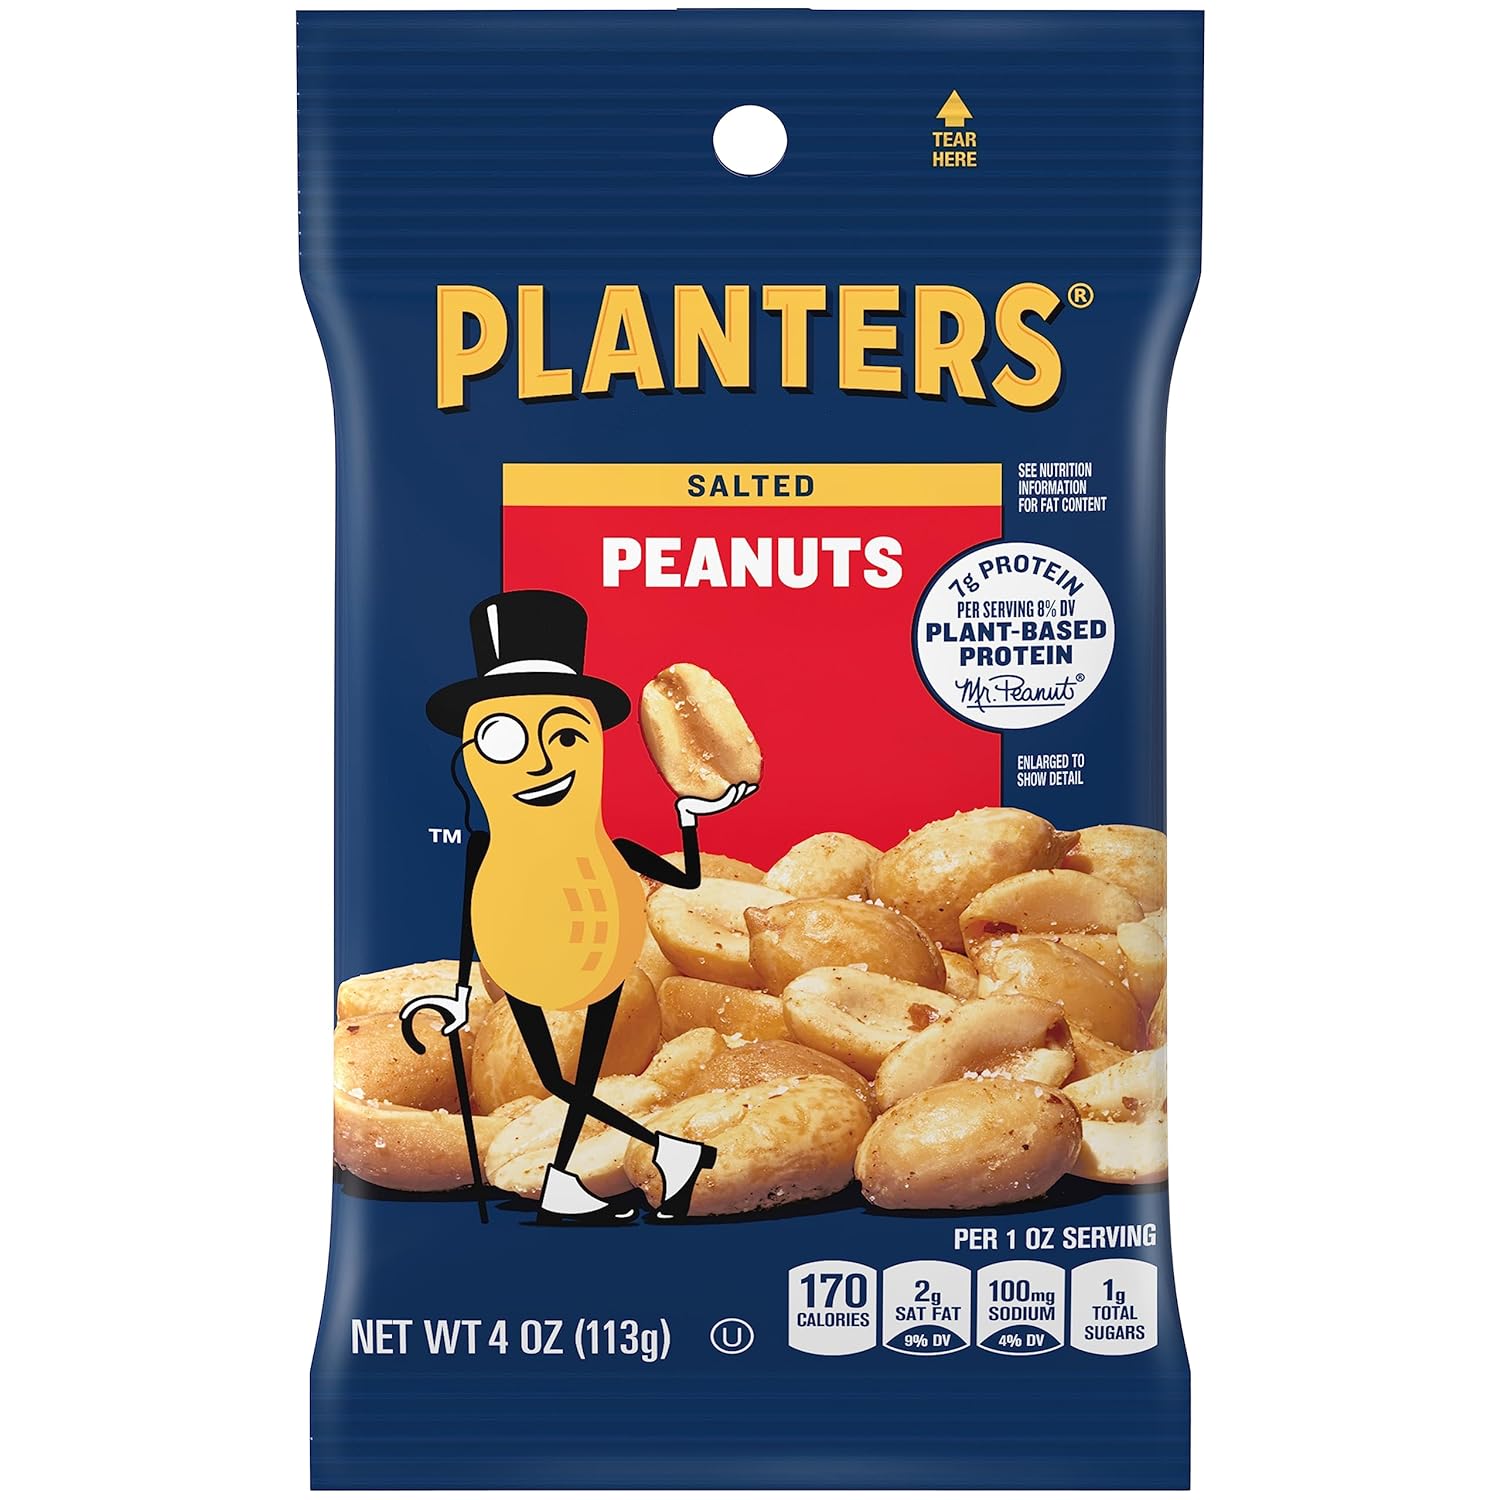 Planters Salted Peanuts, 12-Count as low as $8.49 Shipped Free (Reg. $14.28) – $0.71/4-Oz Bag